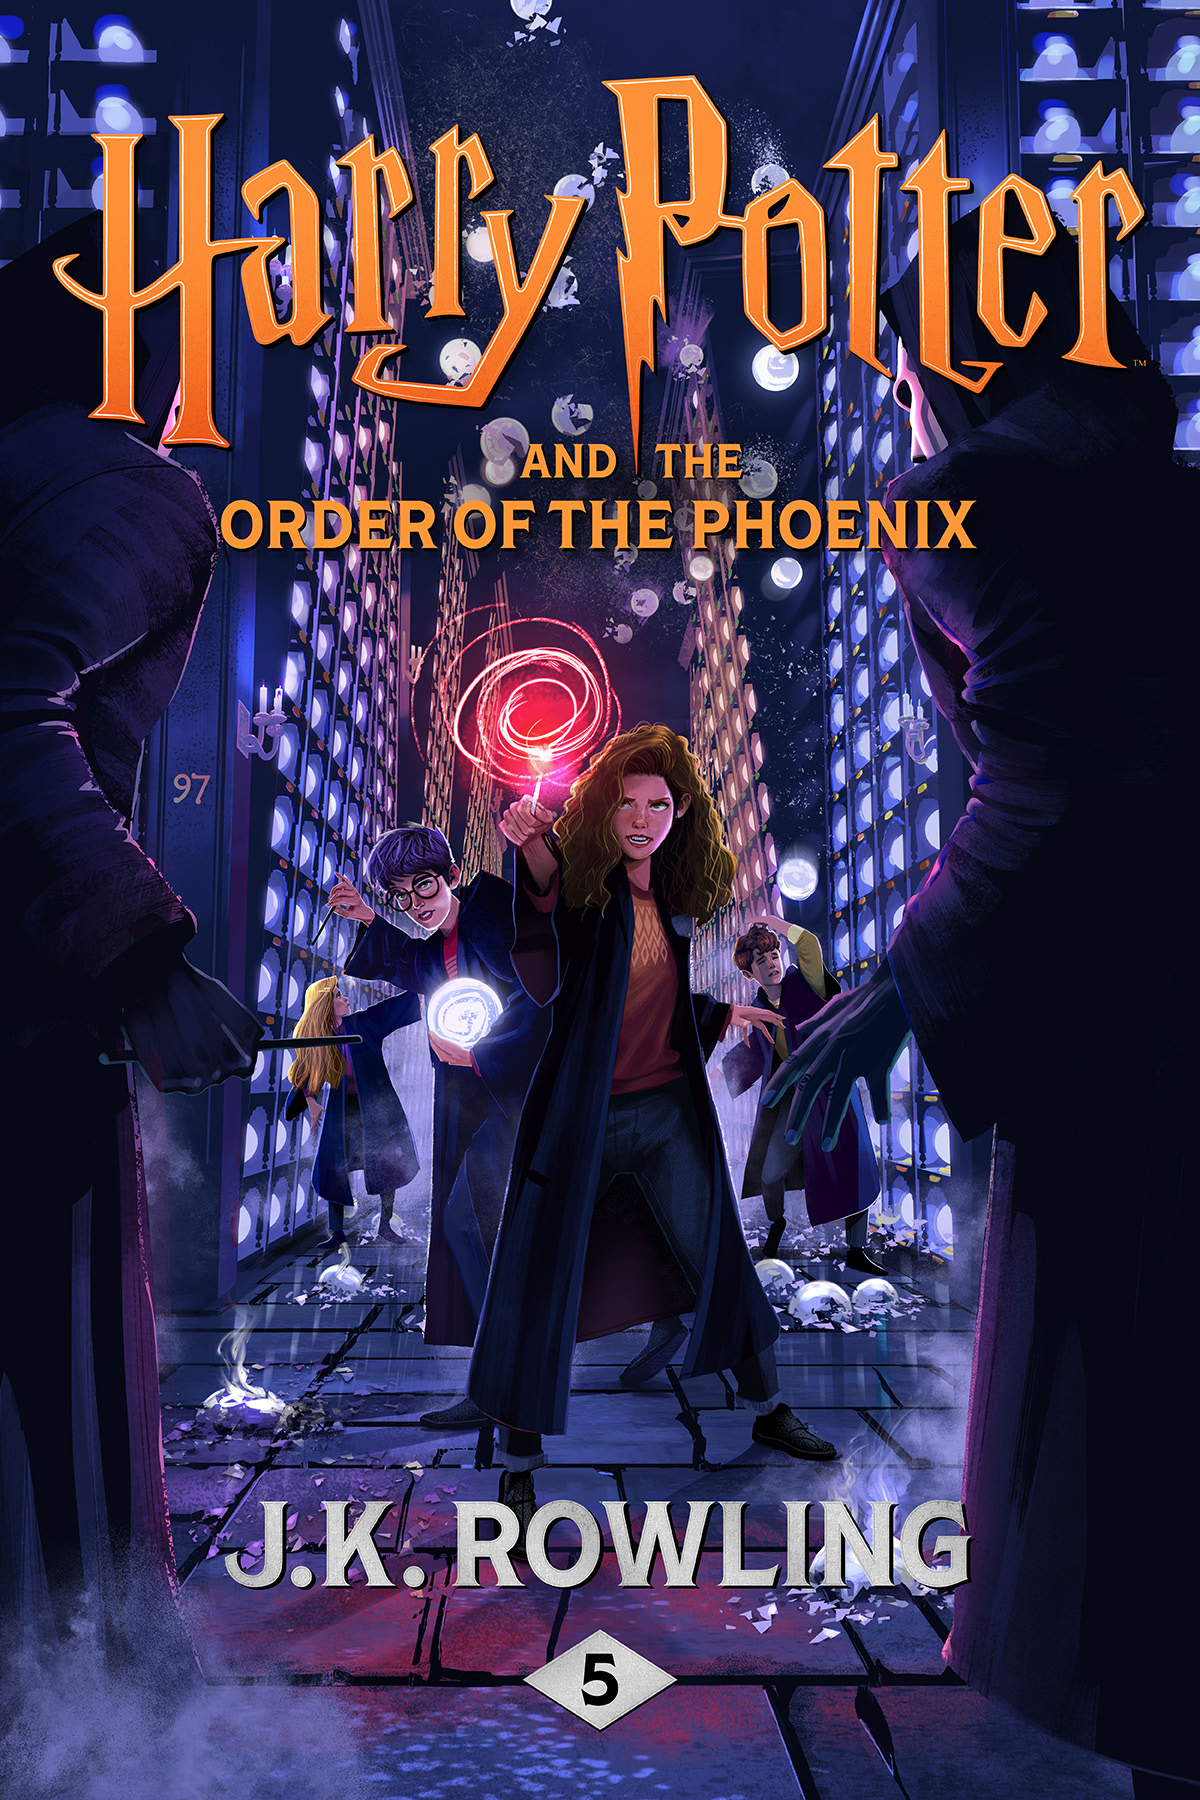 ‘Order of the Phoenix’ 2022 Pottermore eBook/audiobook cover